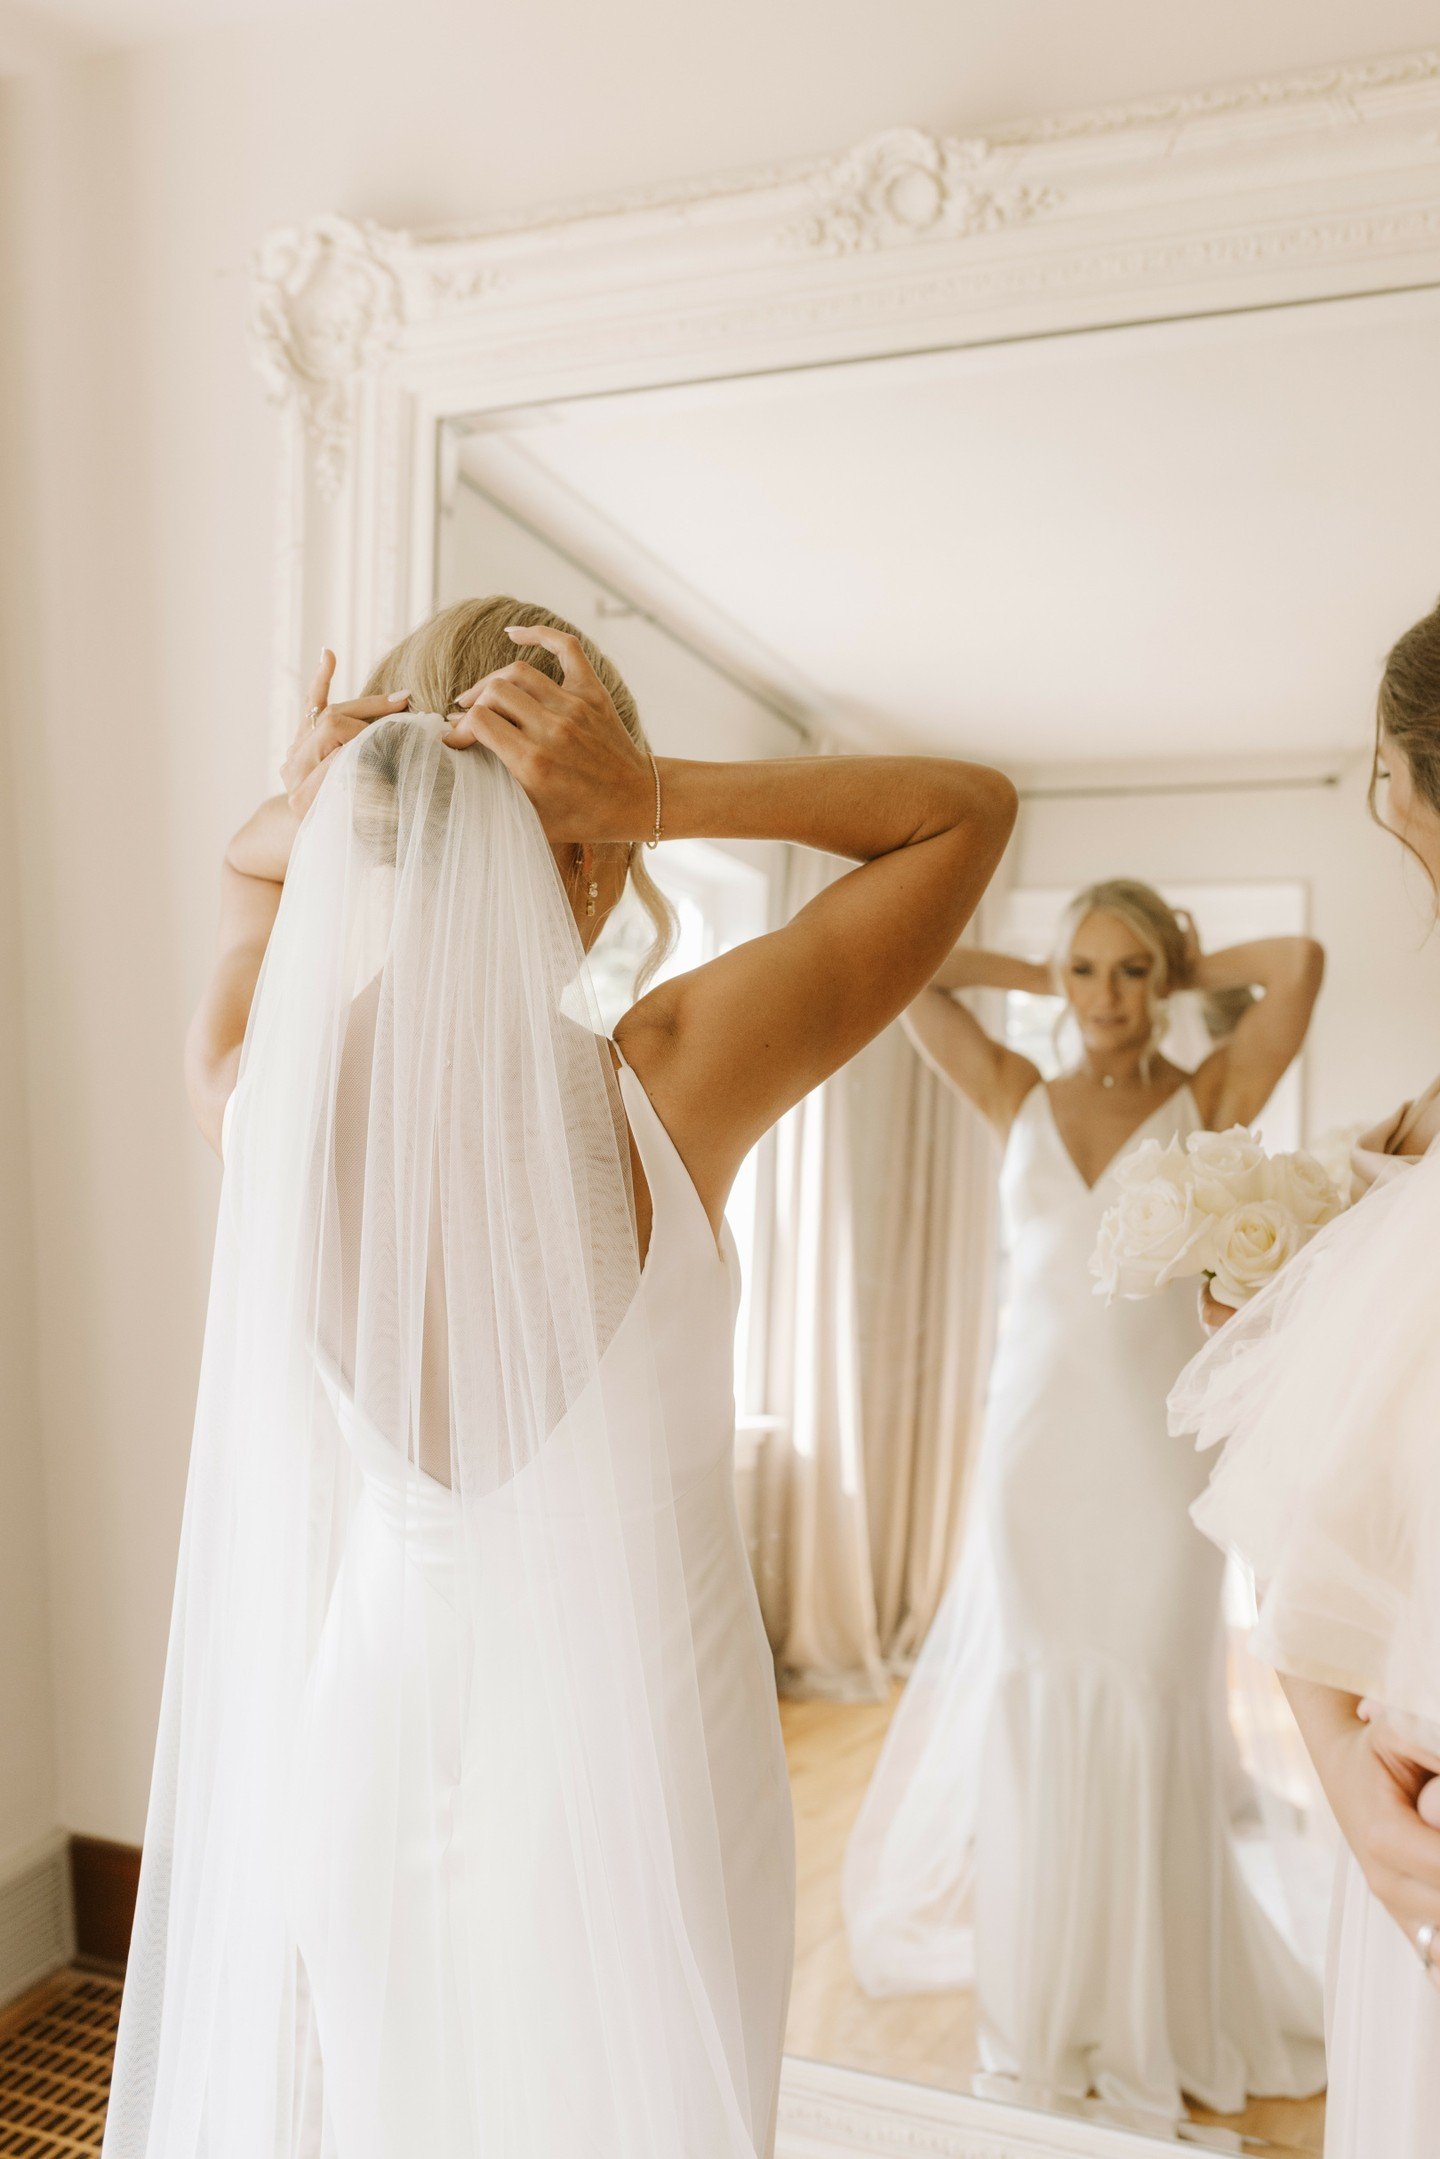 Behind every beautiful bride is a story of anticipation, laughter, and cherished moments. 💖✨ Getting ready in our Bridal Cottage is where dreams begin to unfold, where nerves turn into excitement, and where lifelong memories are made. Here's to the 